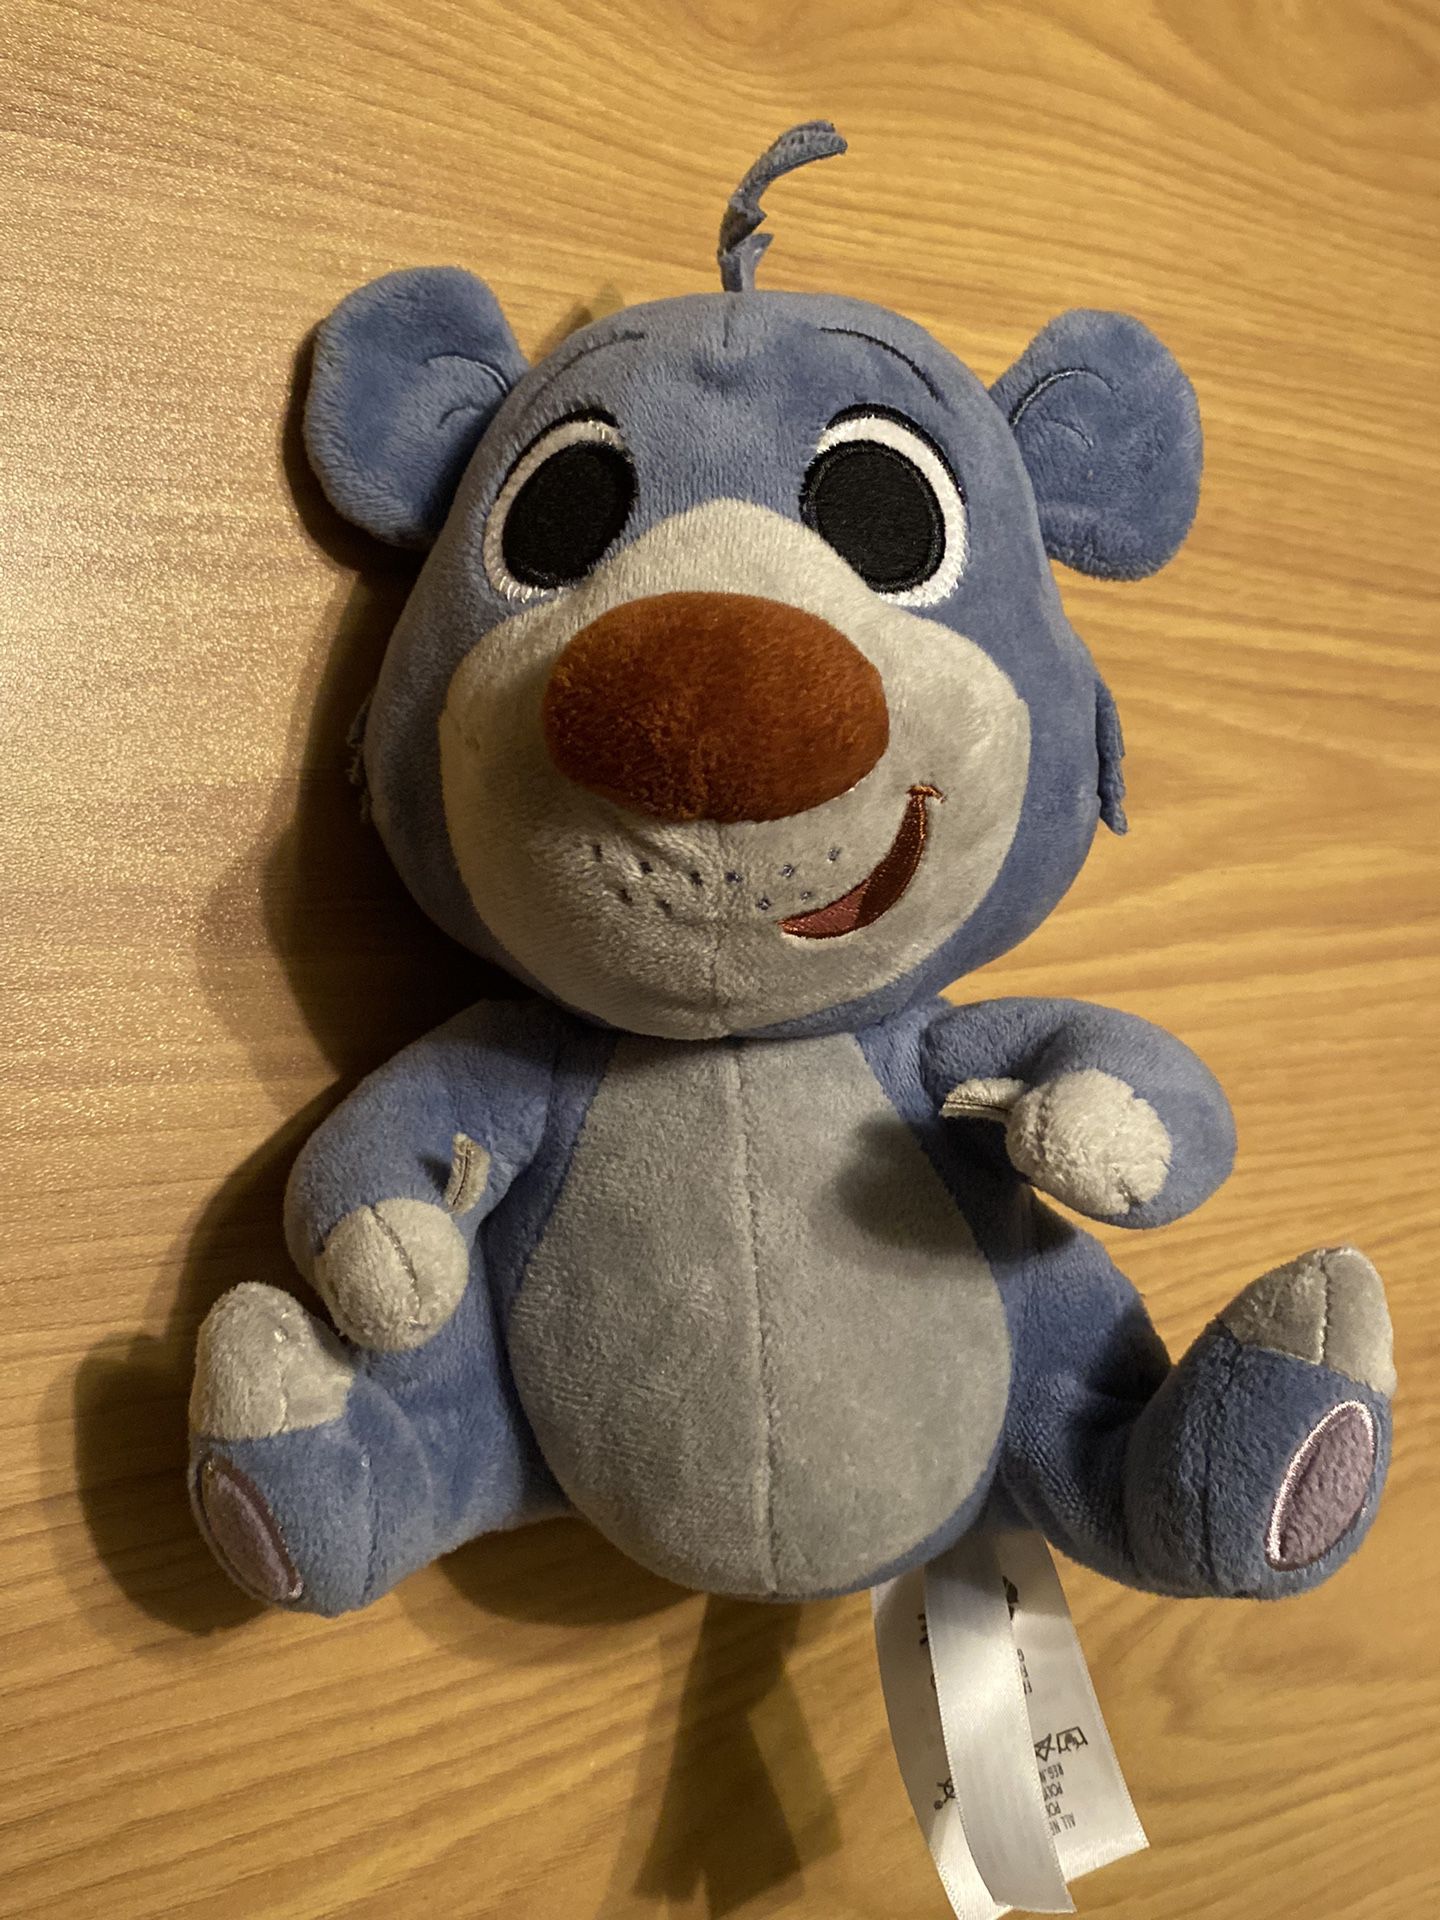 DISNEY JUNGLE BOOK BABY BALOO PLUSH, 9 INCHES, FURRYTALE FRIENDS